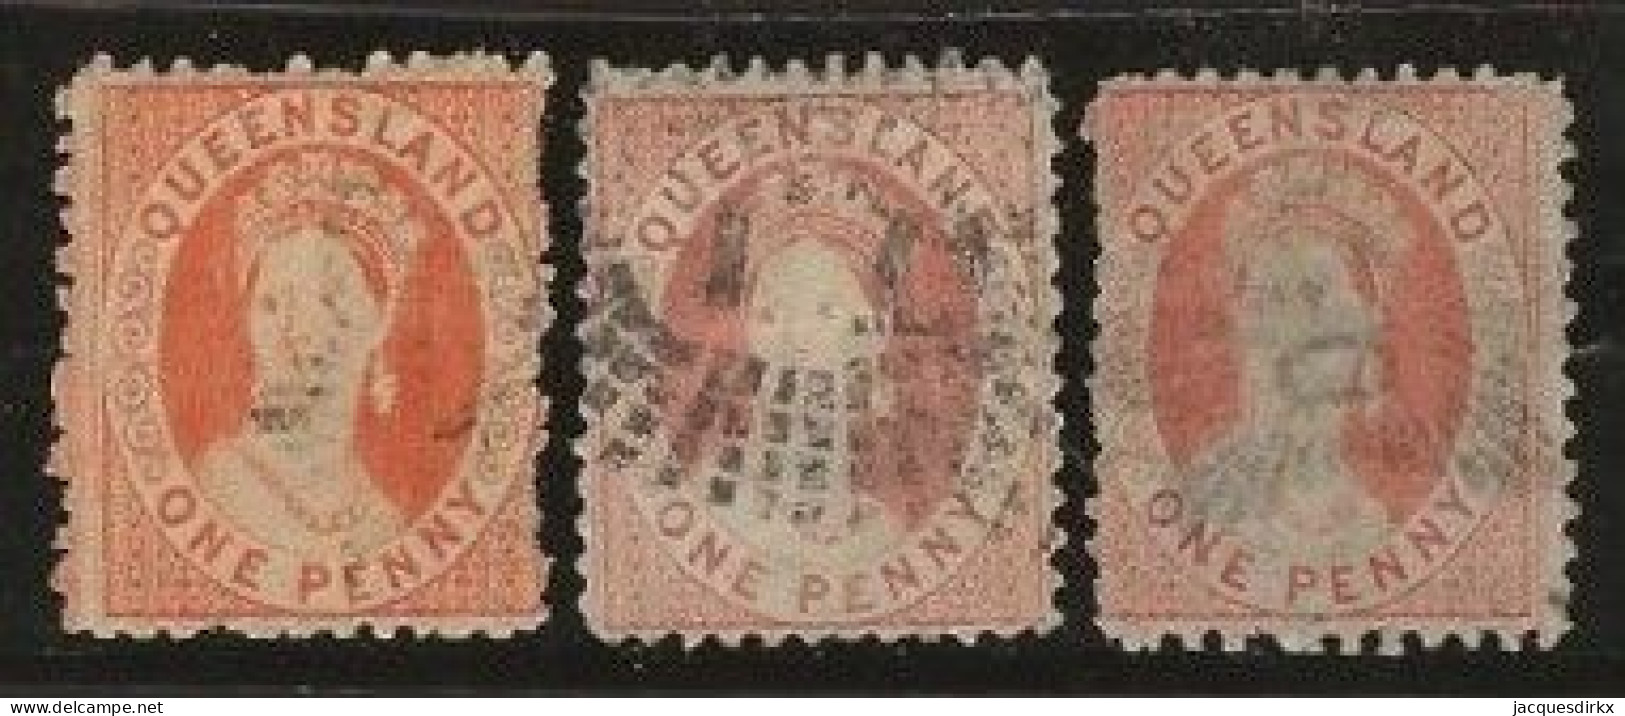 Queensland    .   SG    .   83  3x    .   O      .     Cancelled - Used Stamps